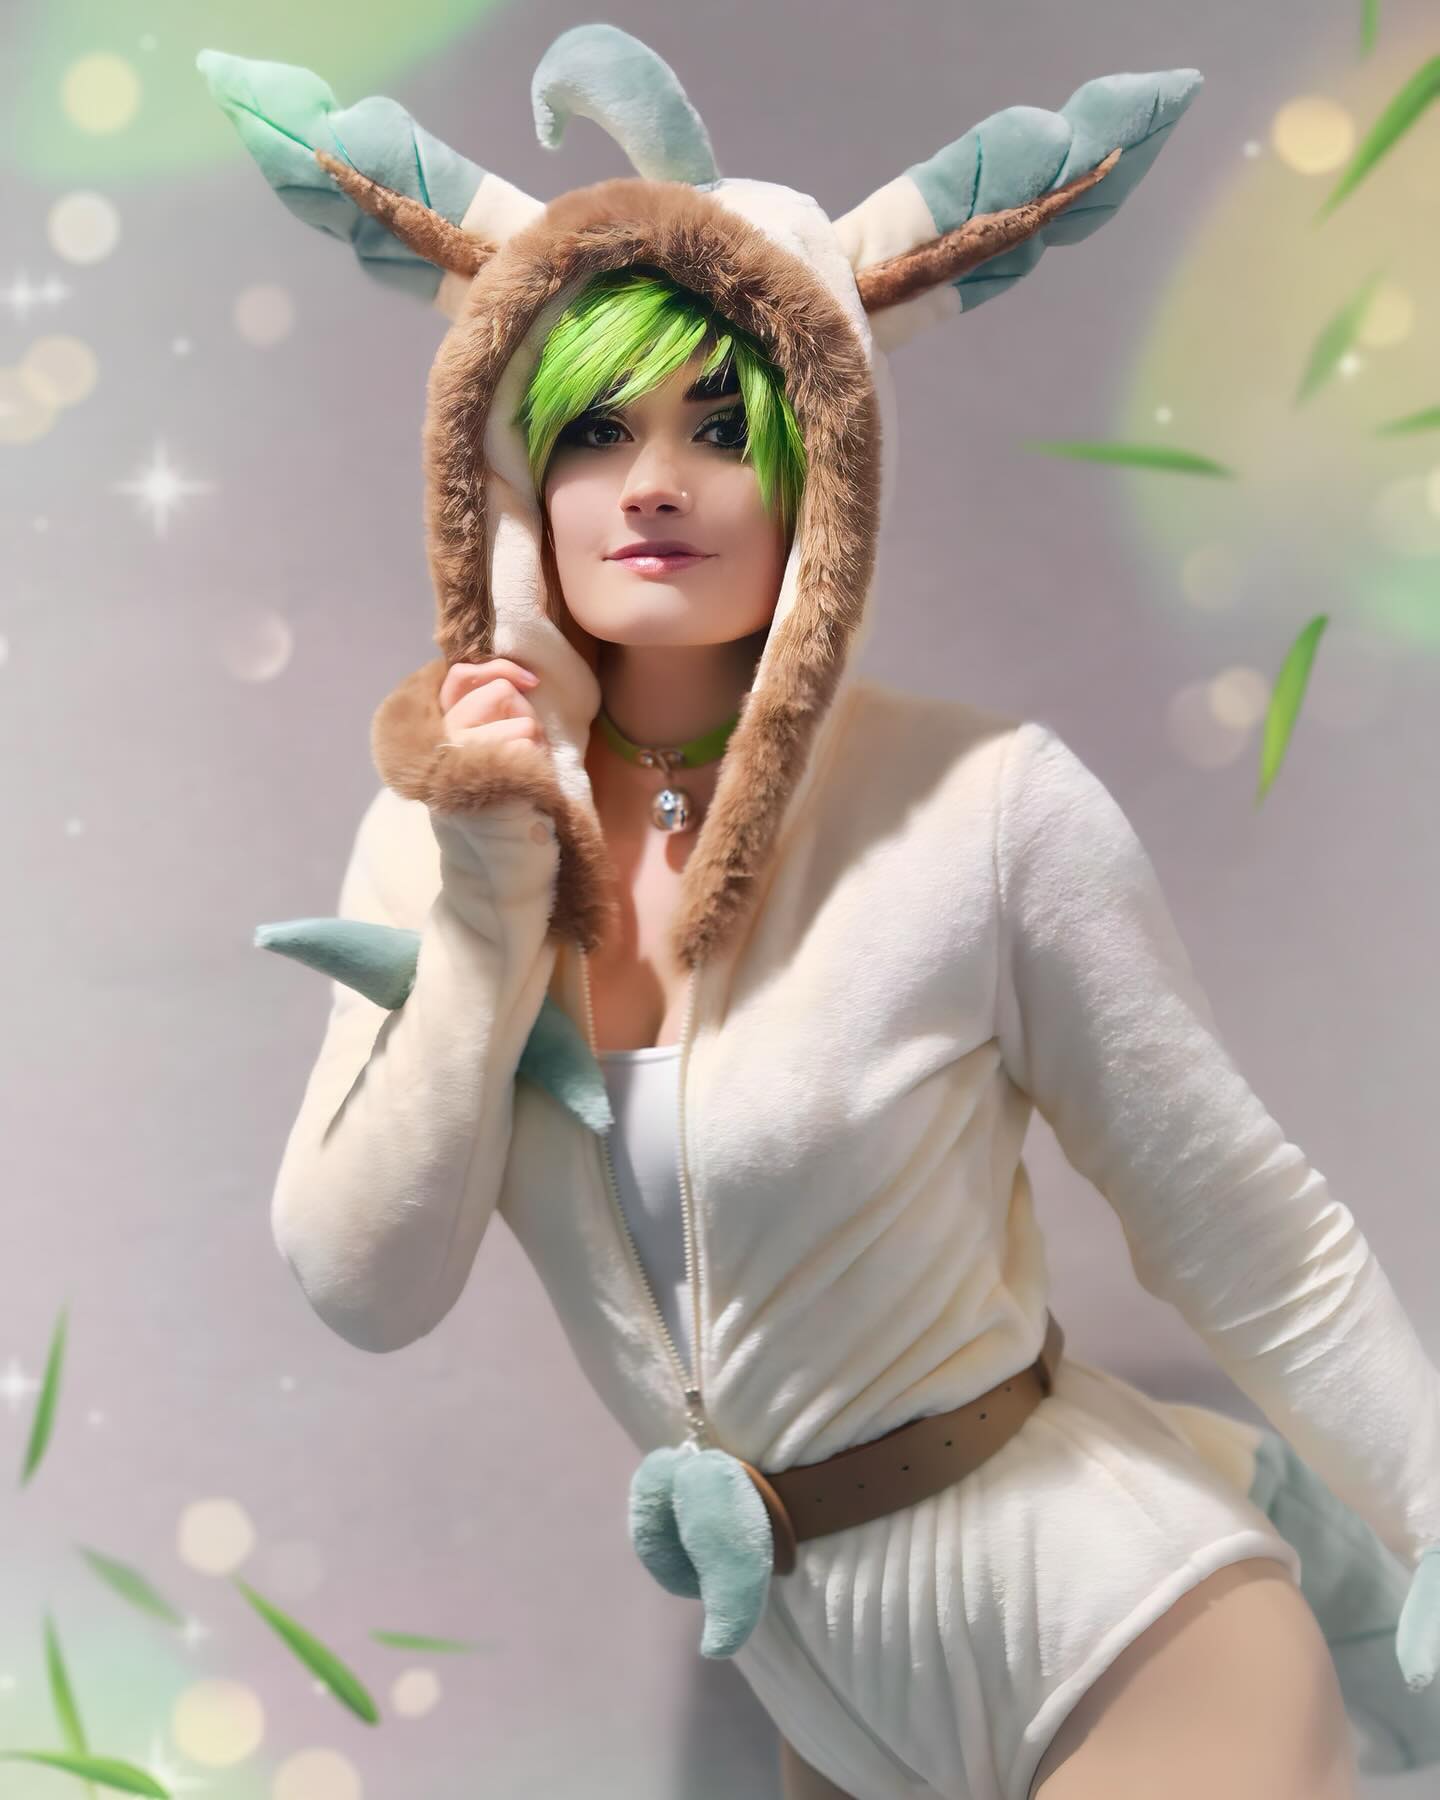 💚🍃 𝐿𝐸𝒜𝐹𝐸𝒪𝒩 𝒯𝐼𝑀𝐸!! 🍃💚 I had so much freaking fun doing the Eeveelution group at HolMat, it was honestly the highlight of my con 🥹 Doing a whole Eevee squad has been a cosplay dream of mine for literal years, and I can’t believe we pulled it off 😭 everyone looked SO CUTE and I couldn’t have asked for a better group of amazing people to squad up with 🥹💚💚 We’ll be dropping group pics soon 🤭 but for now!! Some solo shots of my Leafeon cosplay 🥰 Who’s your favorite Eeveelution?? Mine is Leafy because… hehe, the way you get a Leafeon is by bringing an Eevee to the Mossy Rock hidden in the forest… hehe get it. But also, Leafeon is just so cute 🥹 I just love them so much 🥰 and a BIG THANK YOU to @bertdavisphoto99 for snapping all of the photos of our squad!! 🥹💚
.
.
.
.
#pokemon #pokemoncosplay #leafeon #leafeoncosplay #eeveelution #eeveelutioncosplay #nintendo #pokemoncommunity